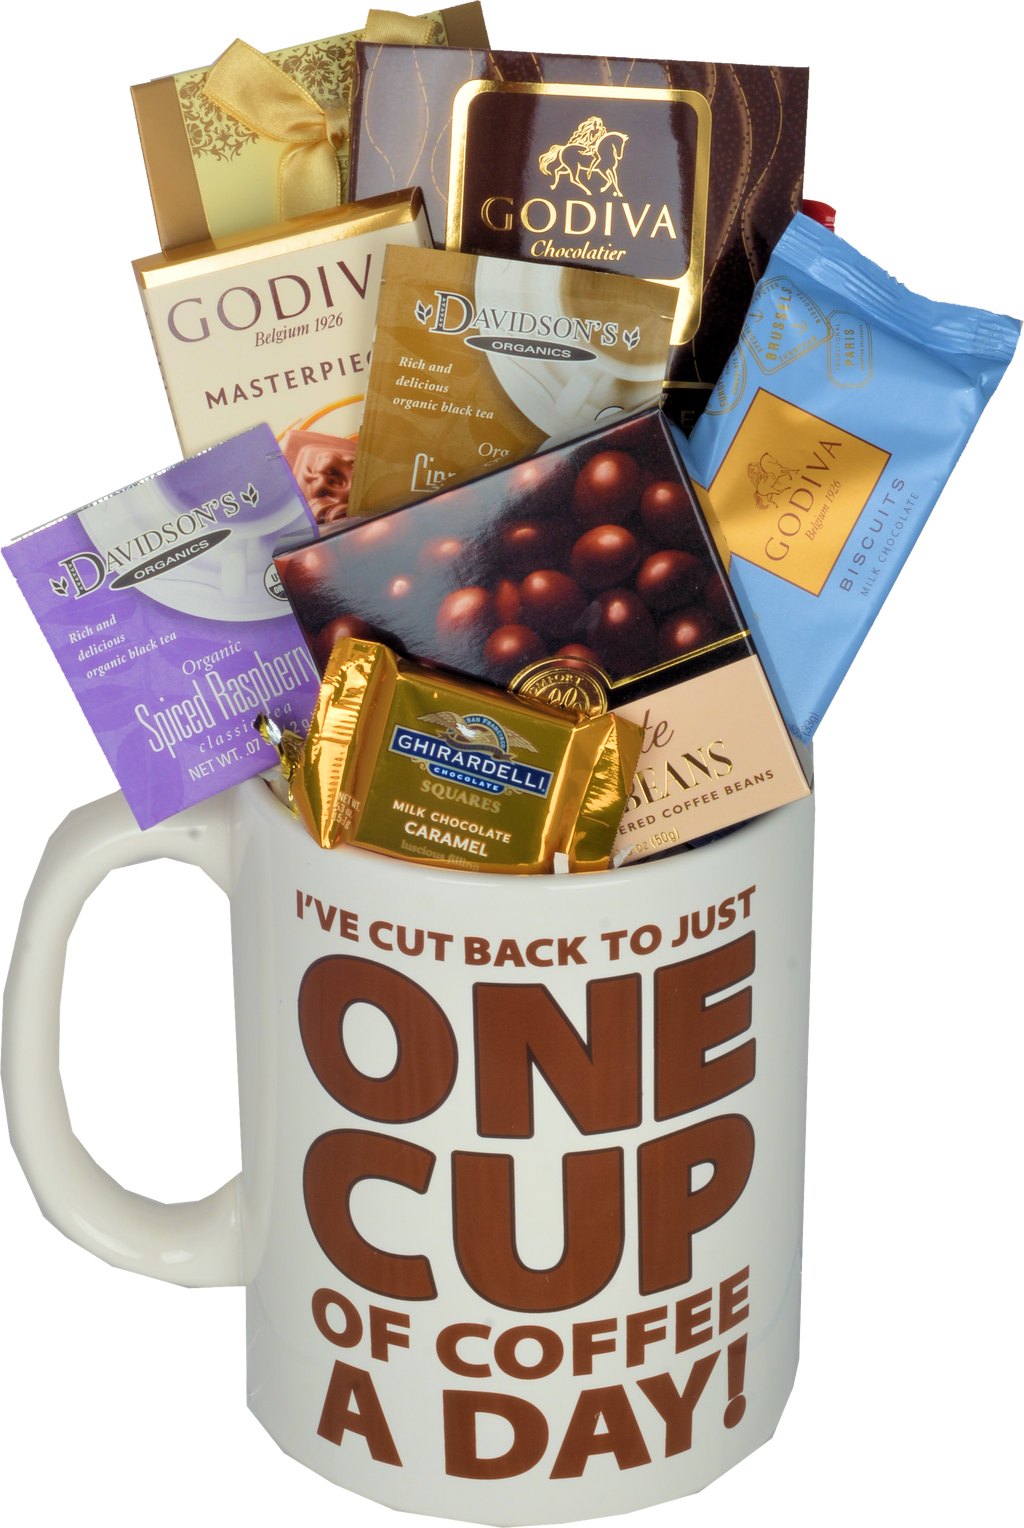 THE JUST ONE CUP - KS Gift Baskets